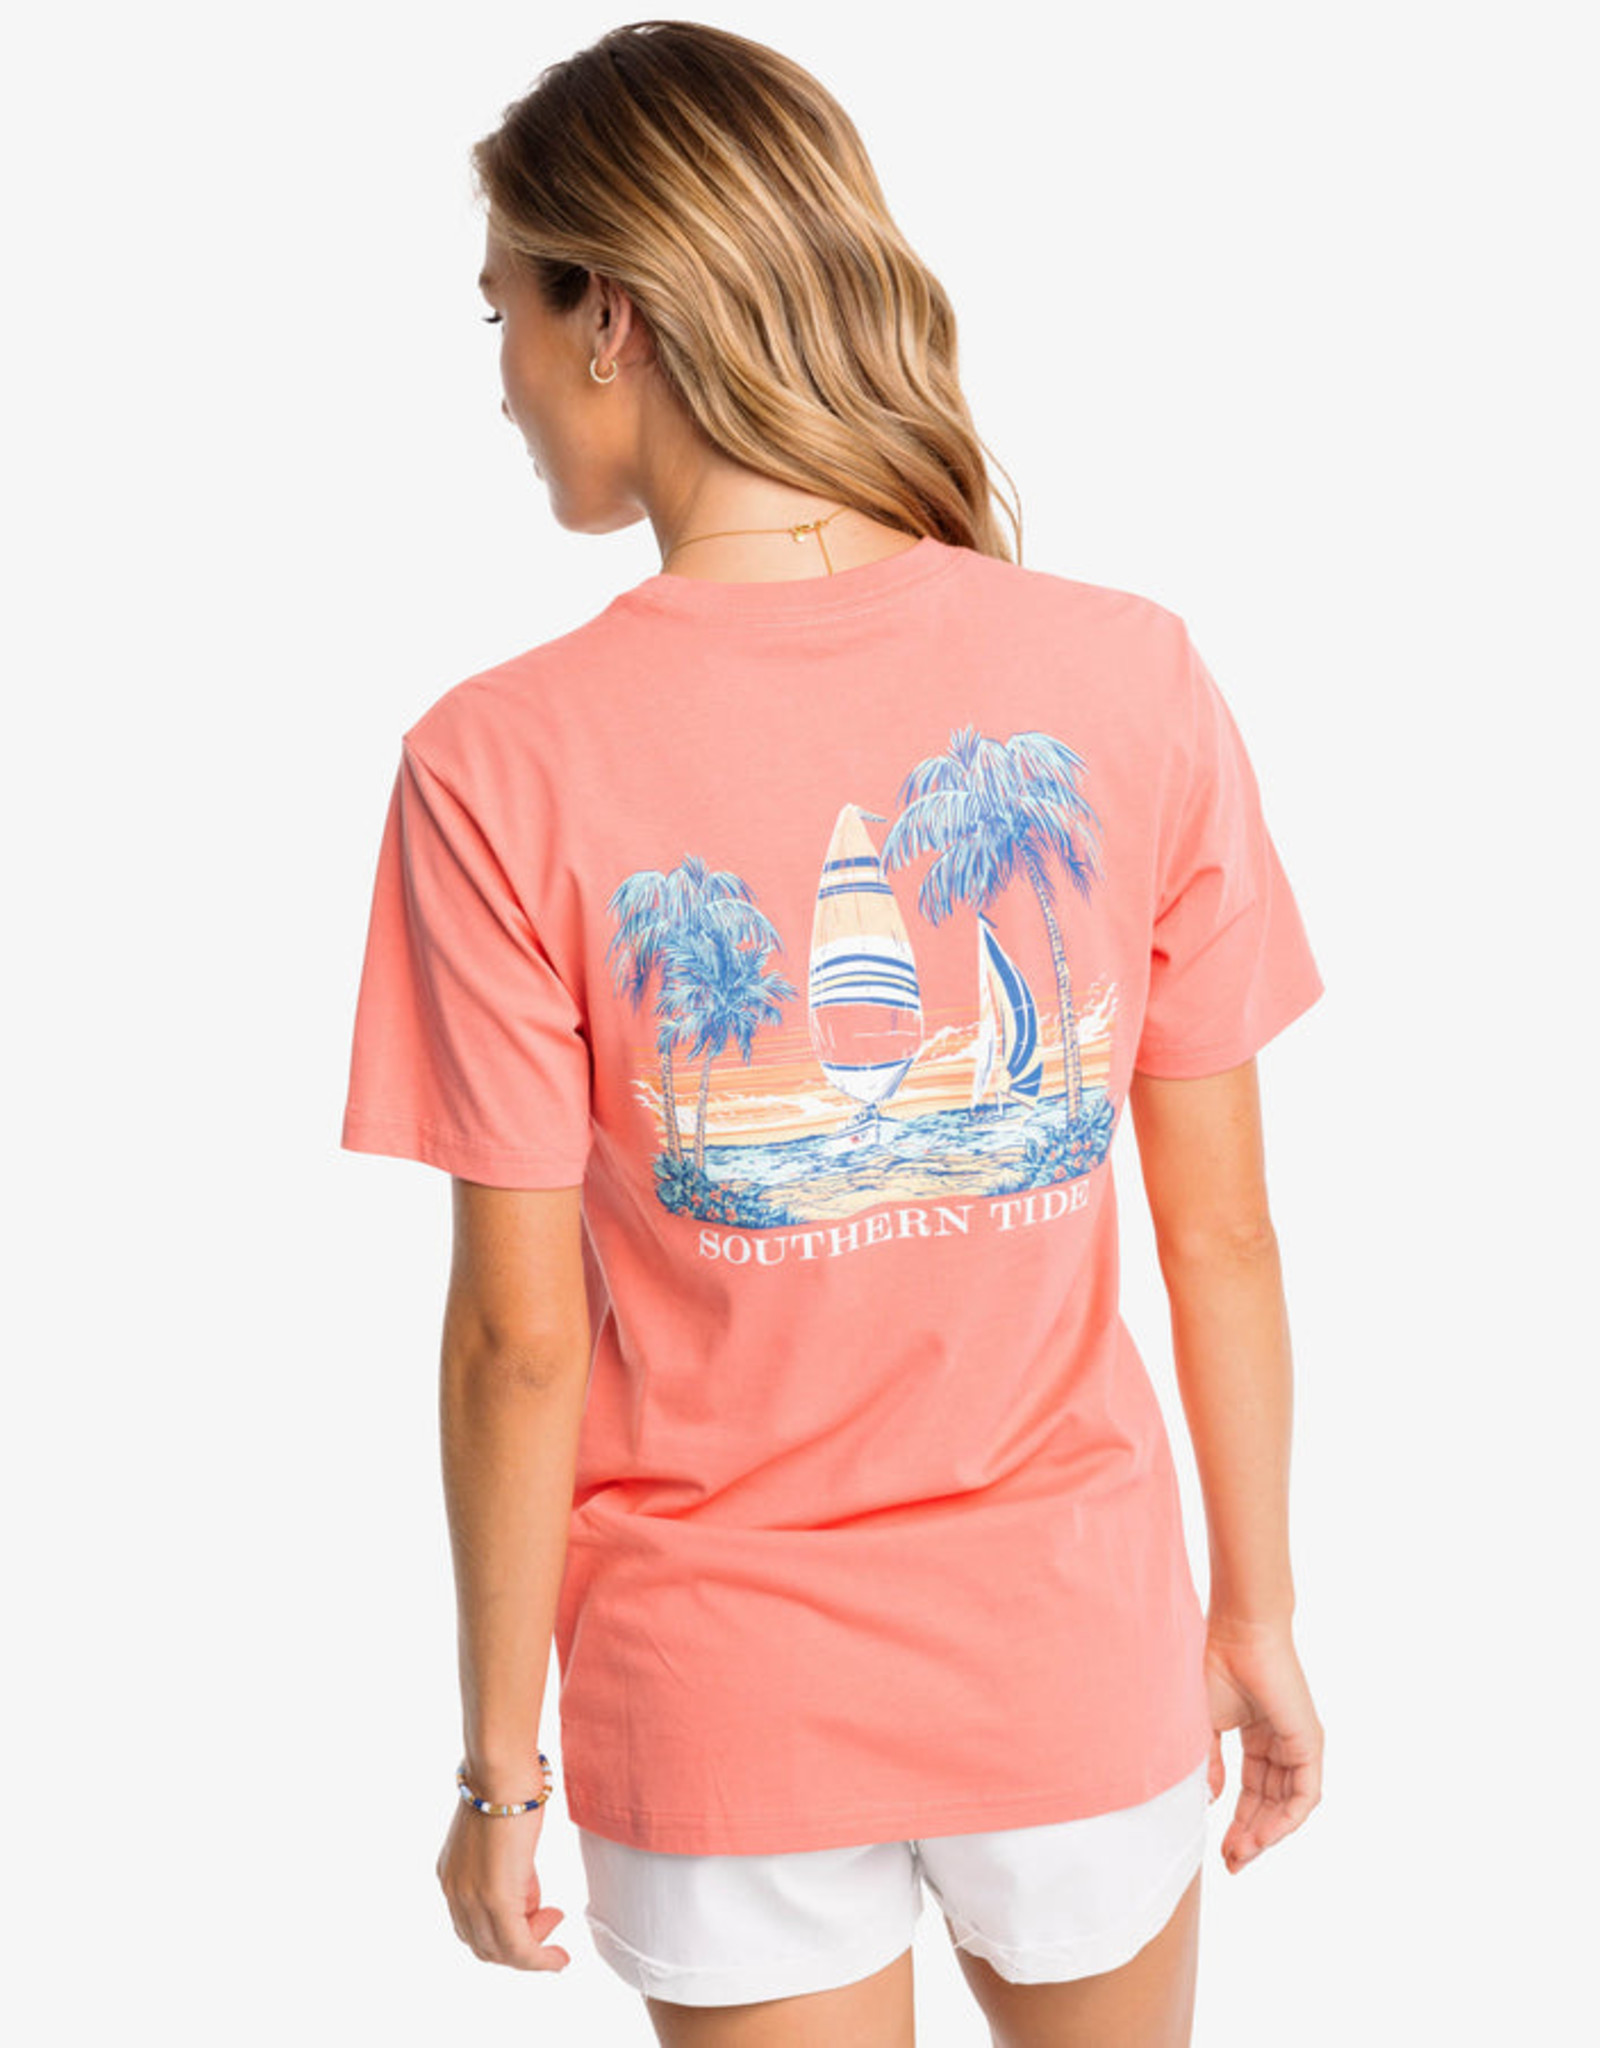 Southern Tide Sunset Sailing Tee